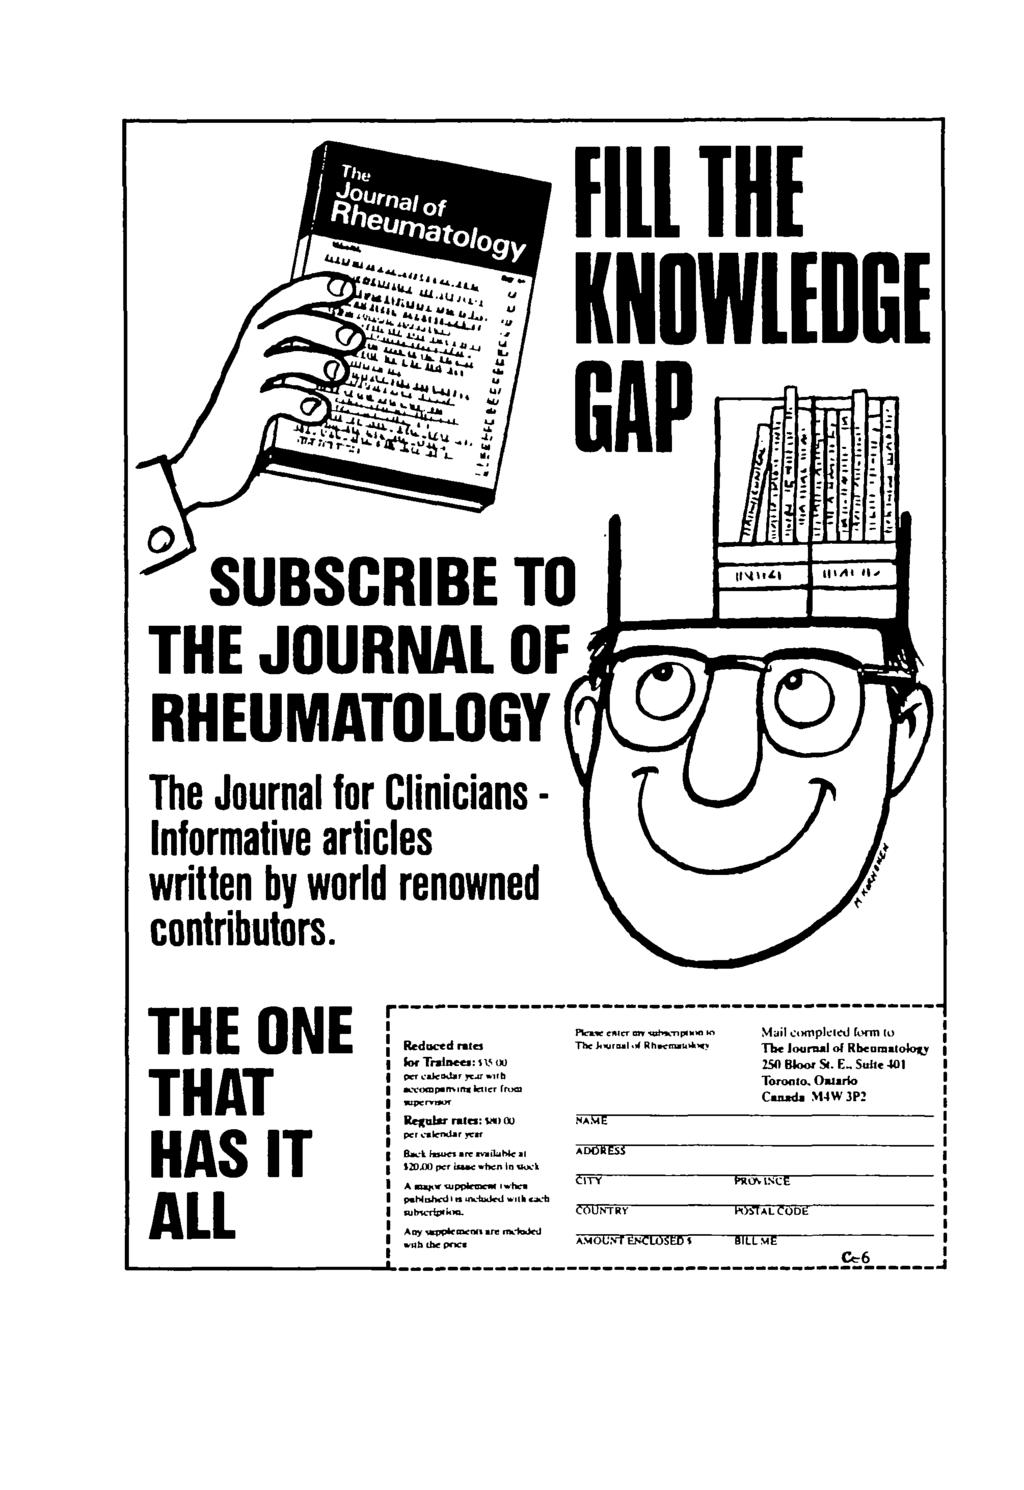 FILL THE KNOWLEDGE SUBSCRIBE TO THE JOURNAL OF RHEUMATOLOGY The Journal for Clinicians - Informative articles written by world renowned contributors.